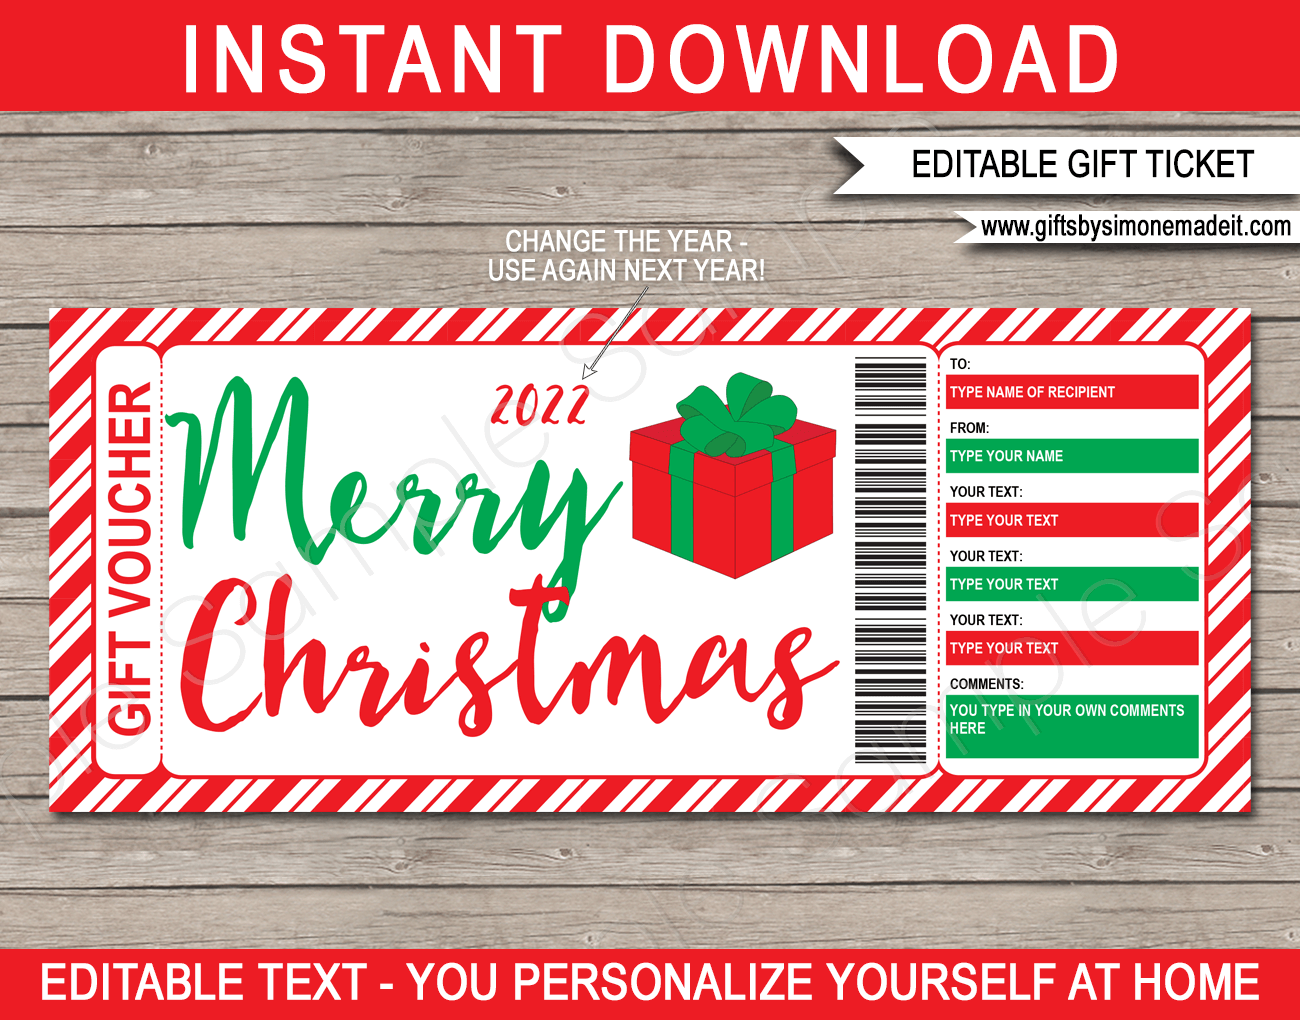 Christmas Gift Voucher Template | Editable & Printable Gift Certificate | Personalized Custom Gift Card | Instant Download via giftsbysimonemadeit.com